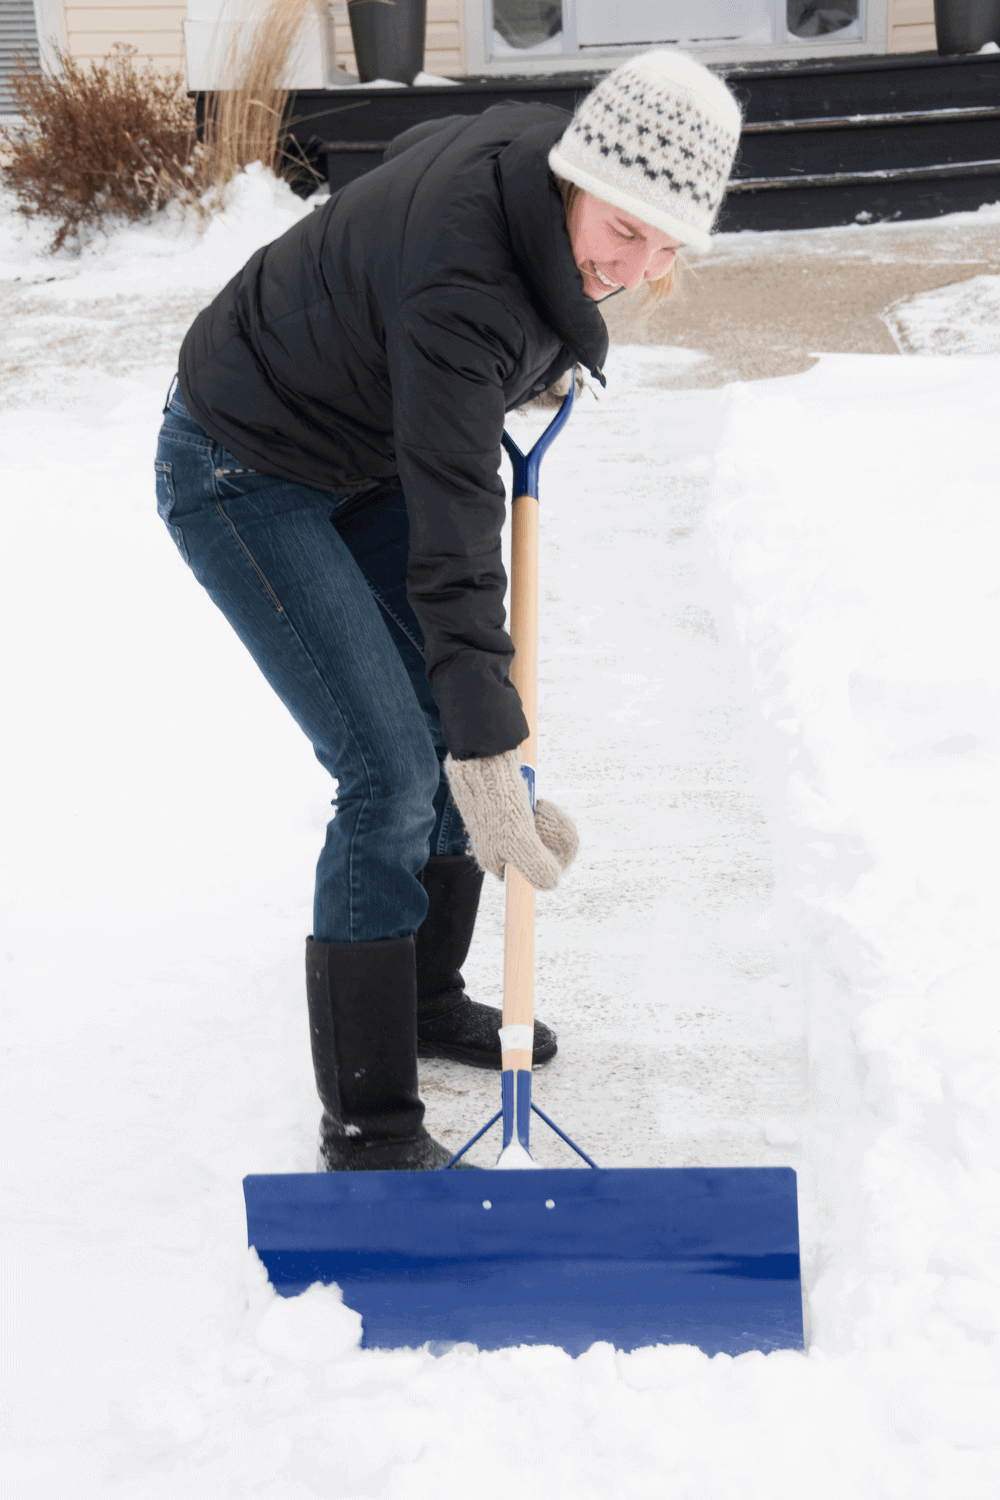 Learn To Shovel Snow Safely This Winter